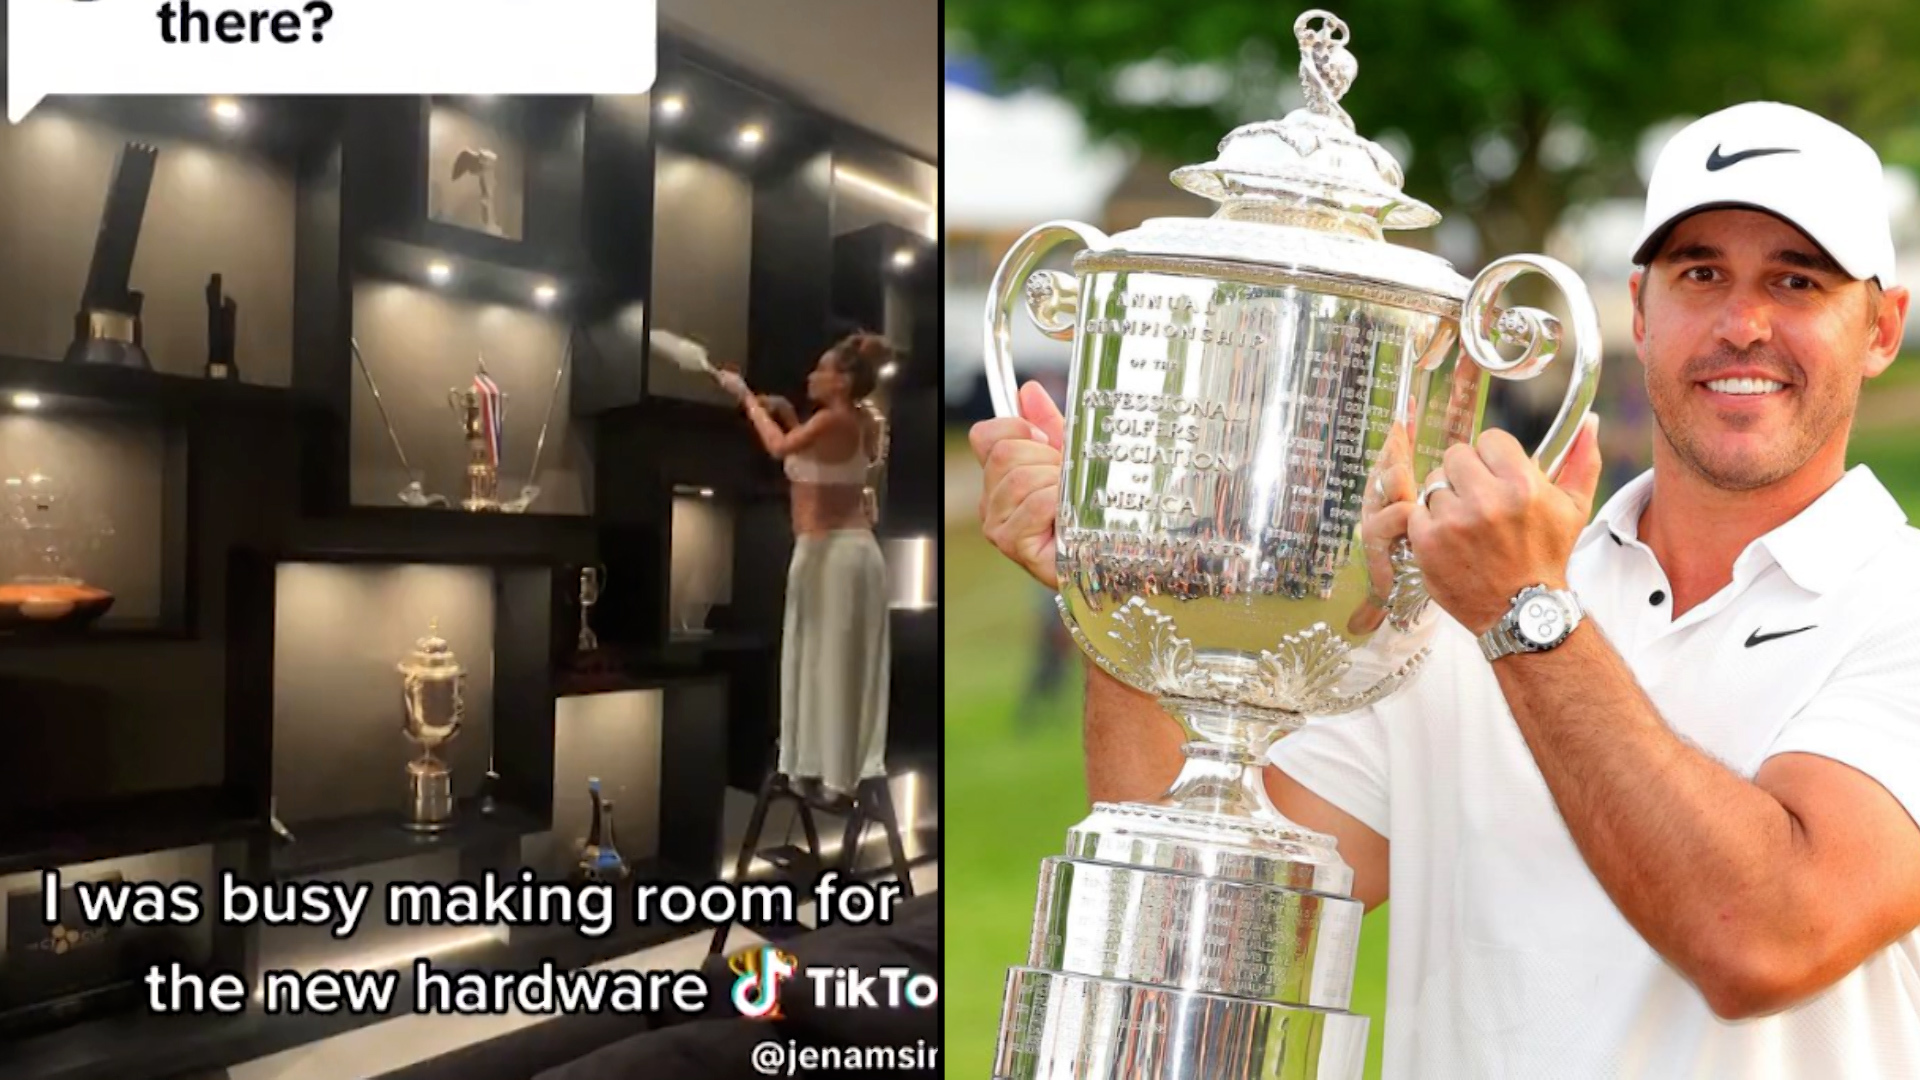 Brooks Koepka's wife Jena Sims goes viral after her husband wins the PGA Championship